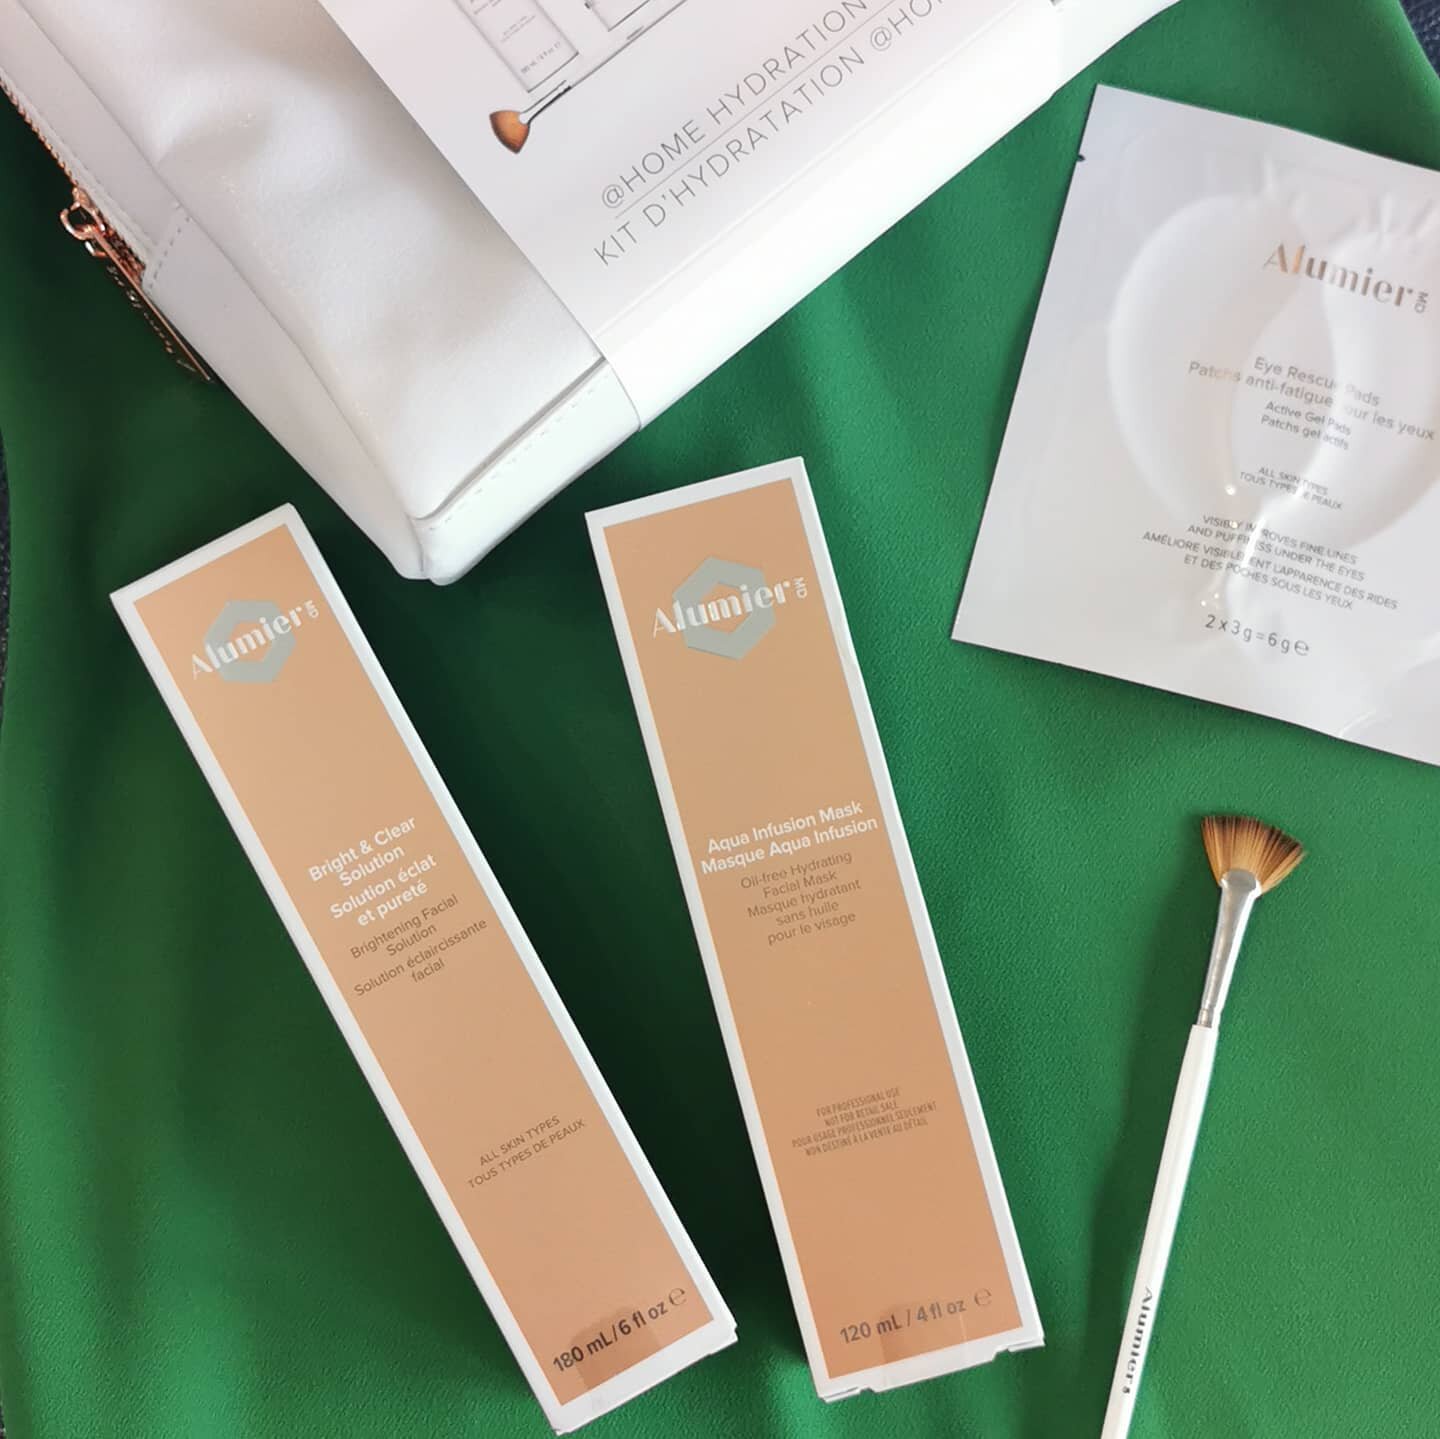 Stay hydrated this St. Patrick's Day with Alumier MD's @homehydrationkit!!! ☘️☘️☘️

#alumiermd #alumiermduk #homefacial #hydrate #healthyskin